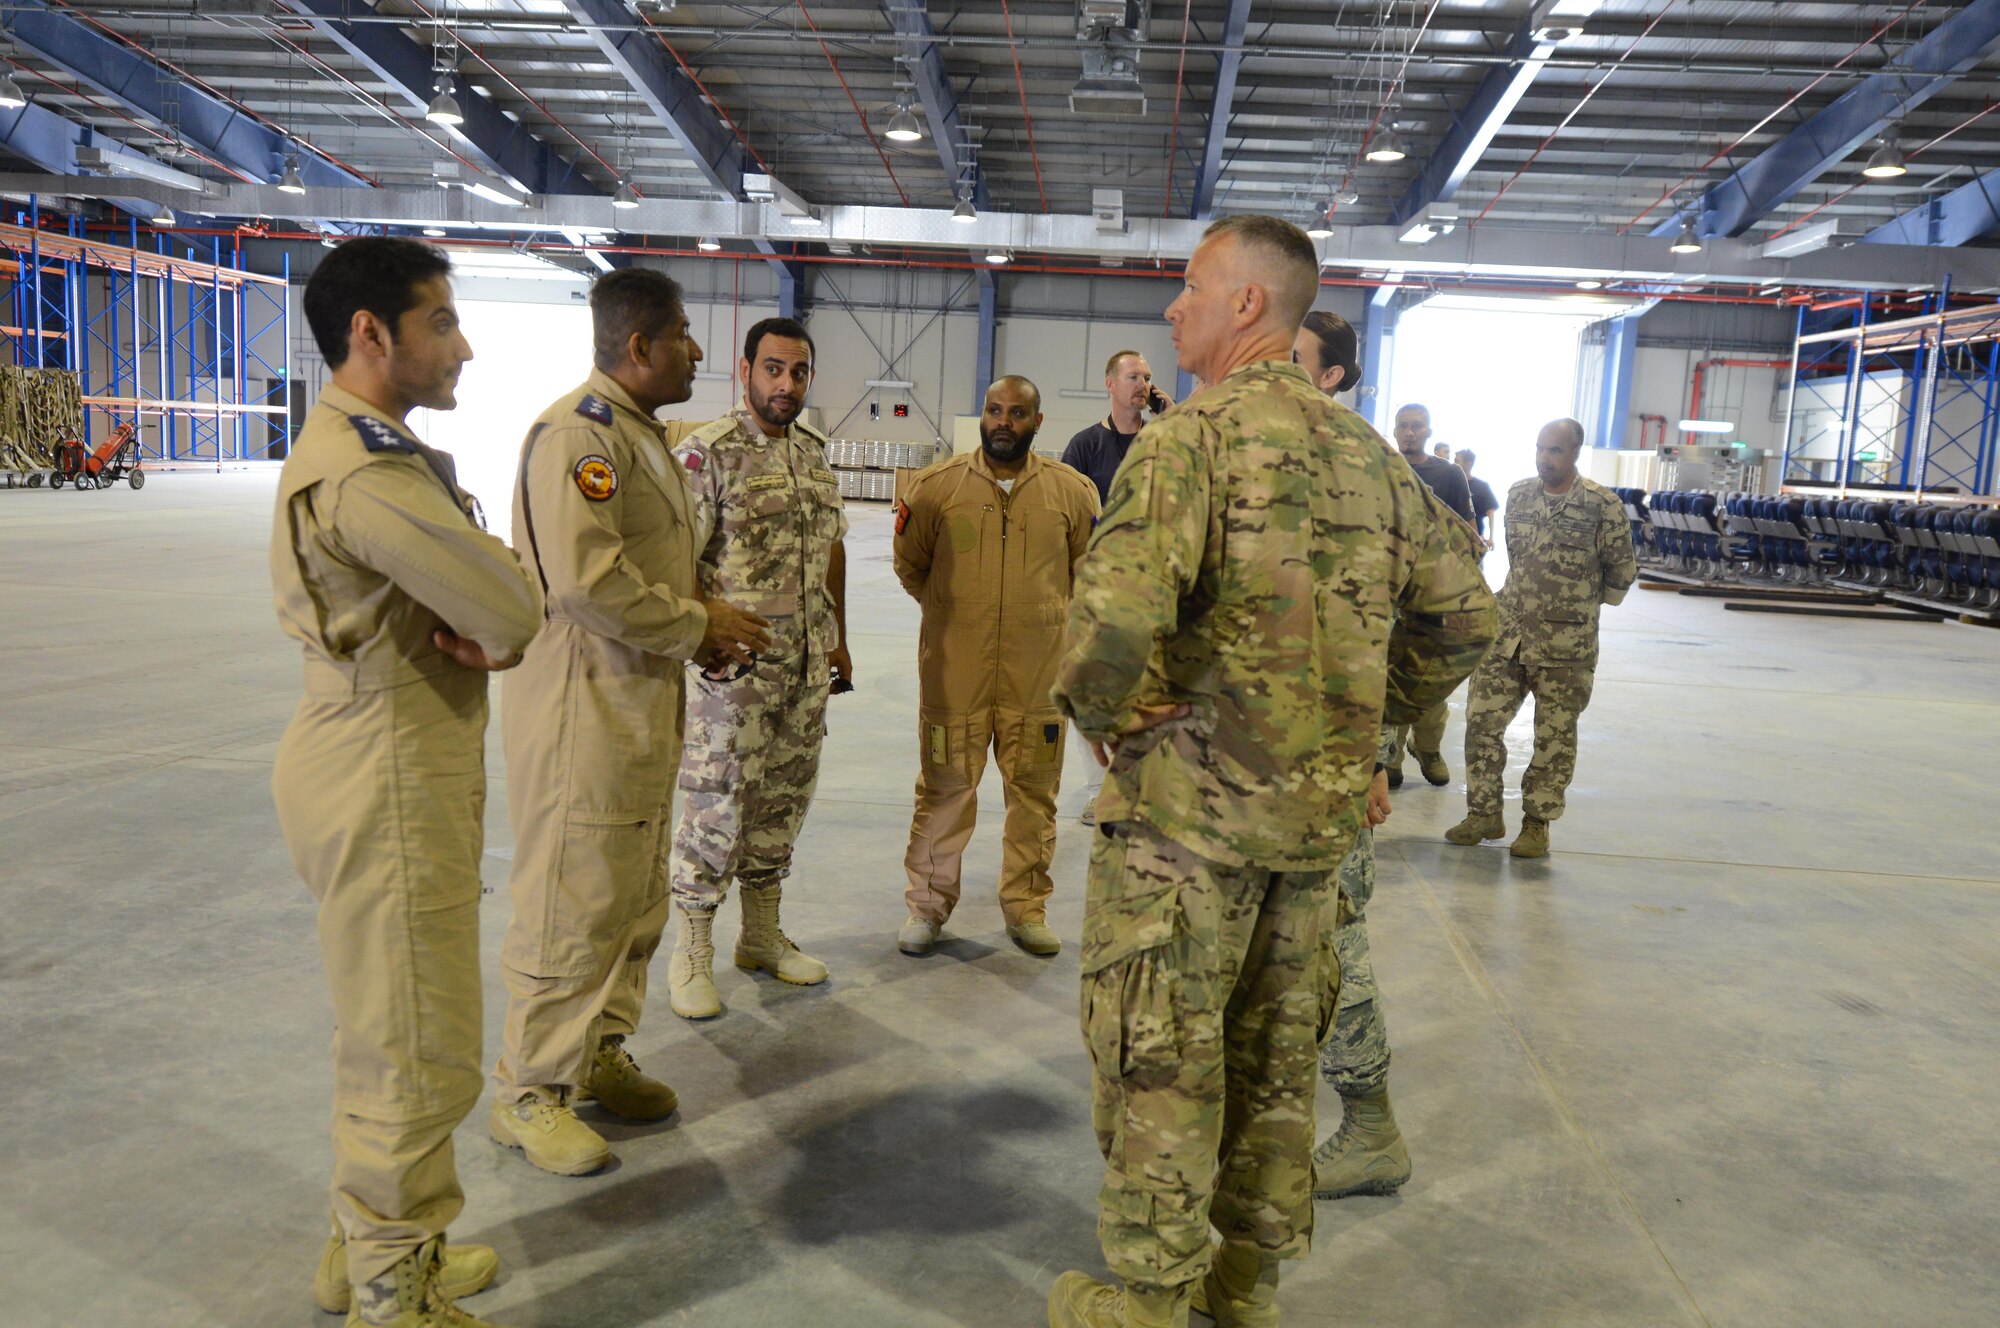 Qatari officials greet U.S. Air Force Lieutenant Colonel Robert Magee, squadron commander for the 8th Expeditionary Air Mobility Squadron (facing away from the camera), inside a newly constructed Qatari facility located at Al Udeid Air Base, Qatar, April 26, 2017. The Qatari officials and Macgee met inside the facility to observe a training exercise kicking off collaboration between the Qatari Air Force and the U.S. air force. (U.S. Air Force photo by Tech. Sgt. Bradly A. Schneider)